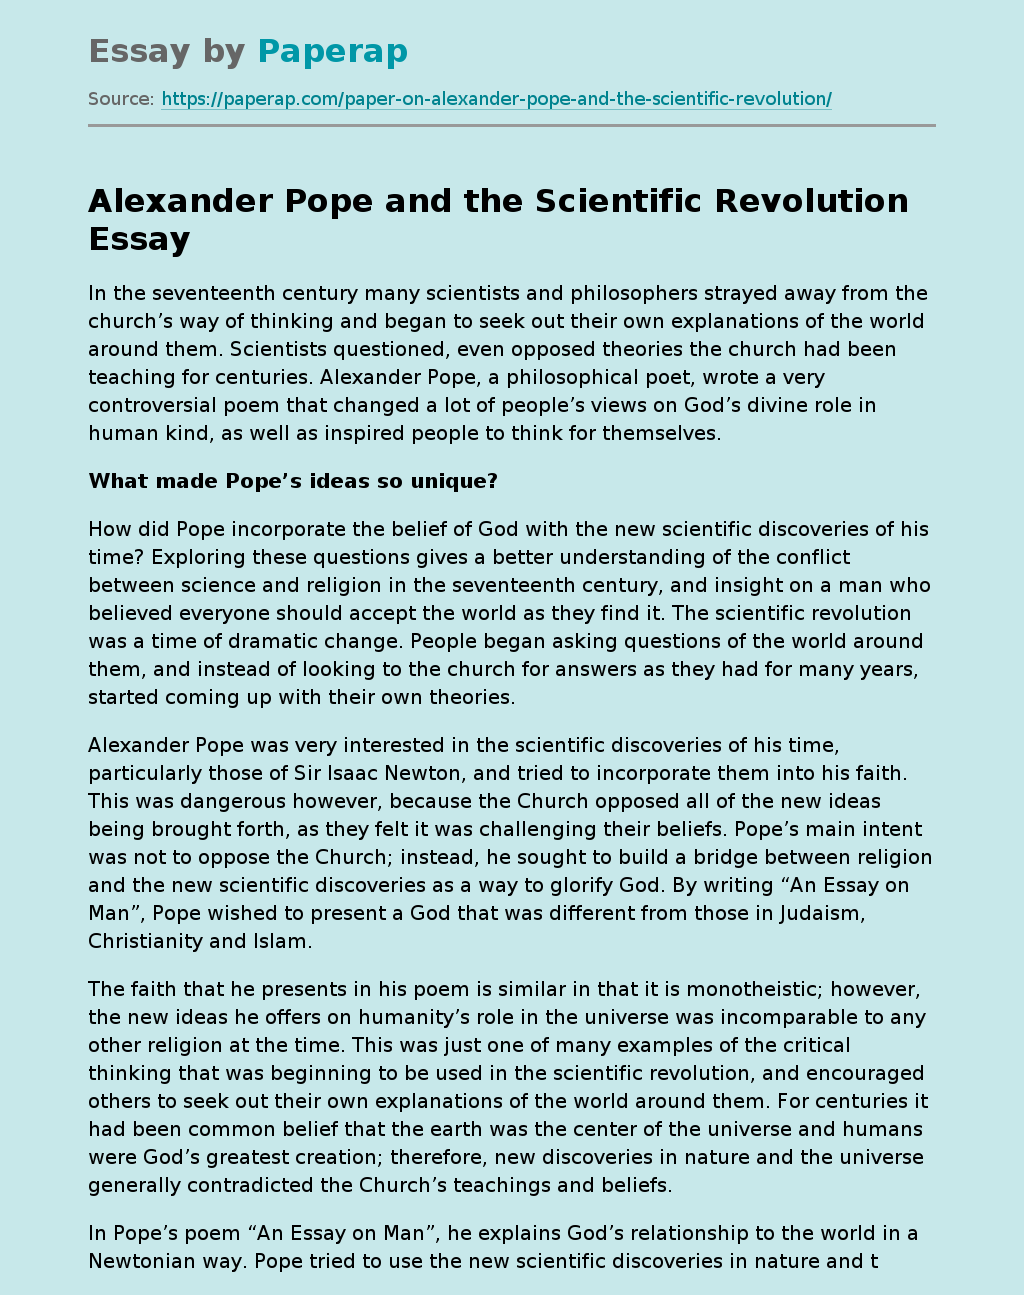 Alexander Pope and the Scientific Revolution